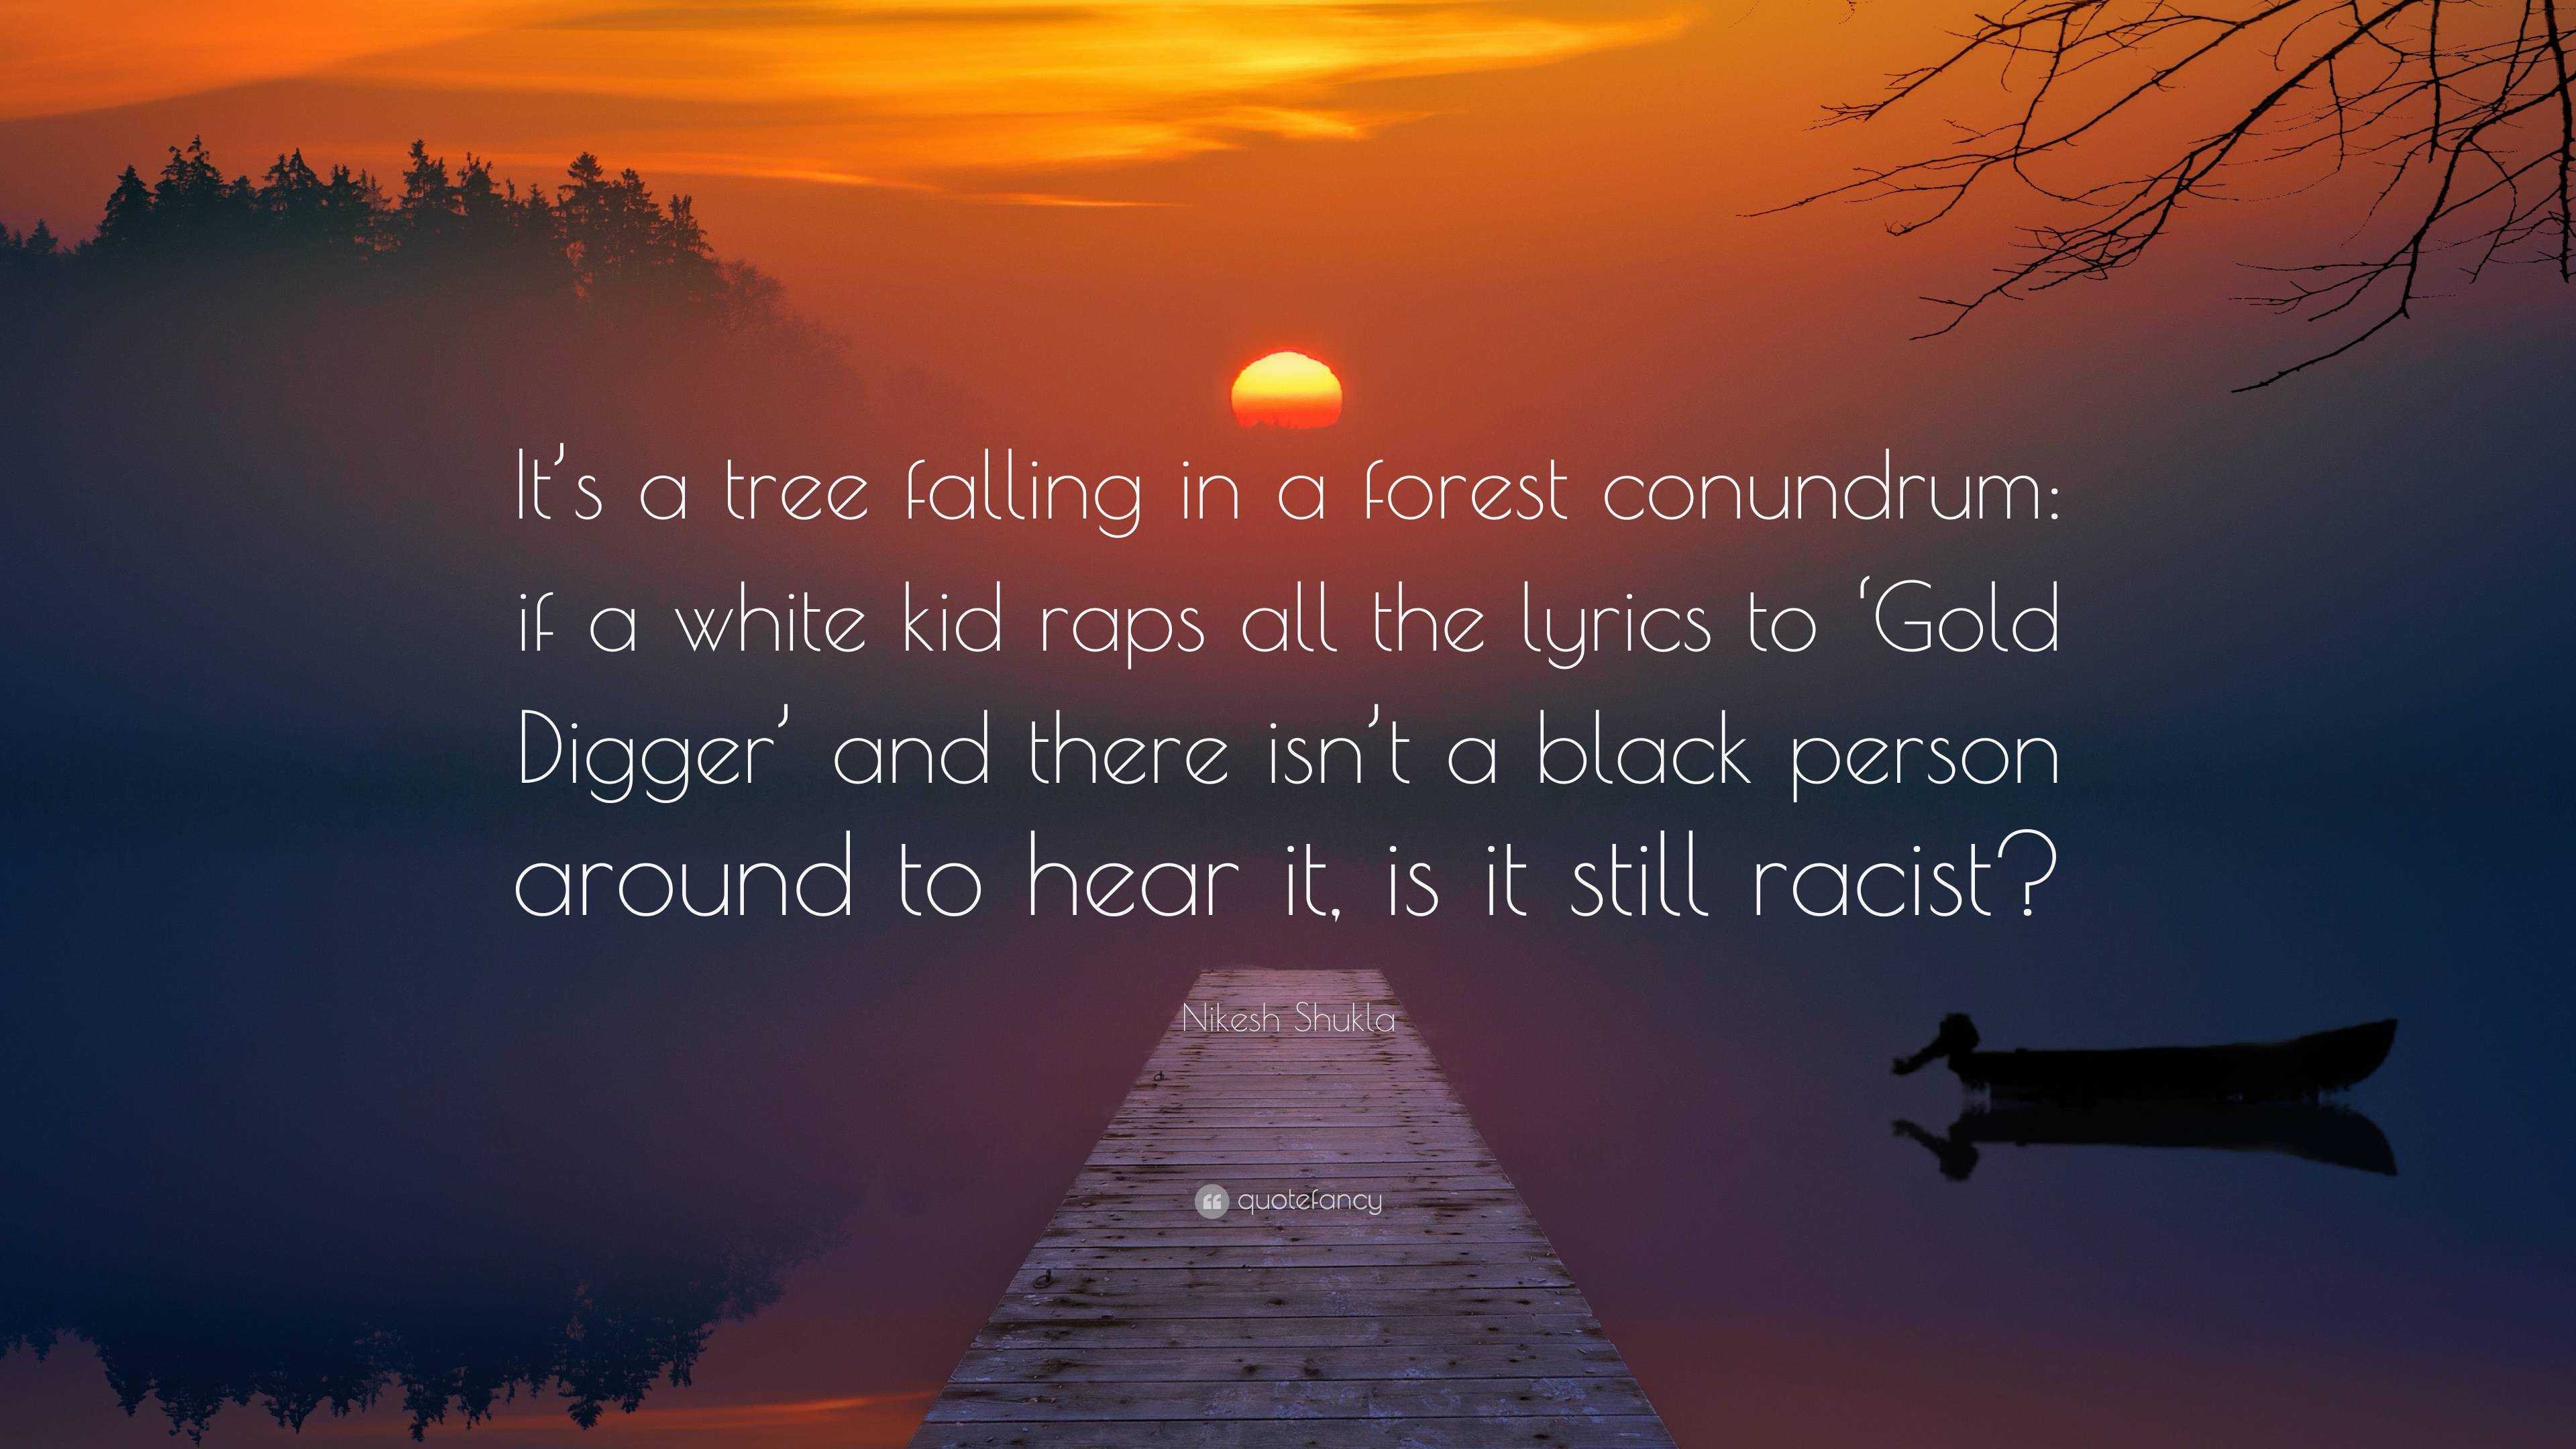 Nikesh Shukla Quote: “It's a tree falling in a forest conundrum